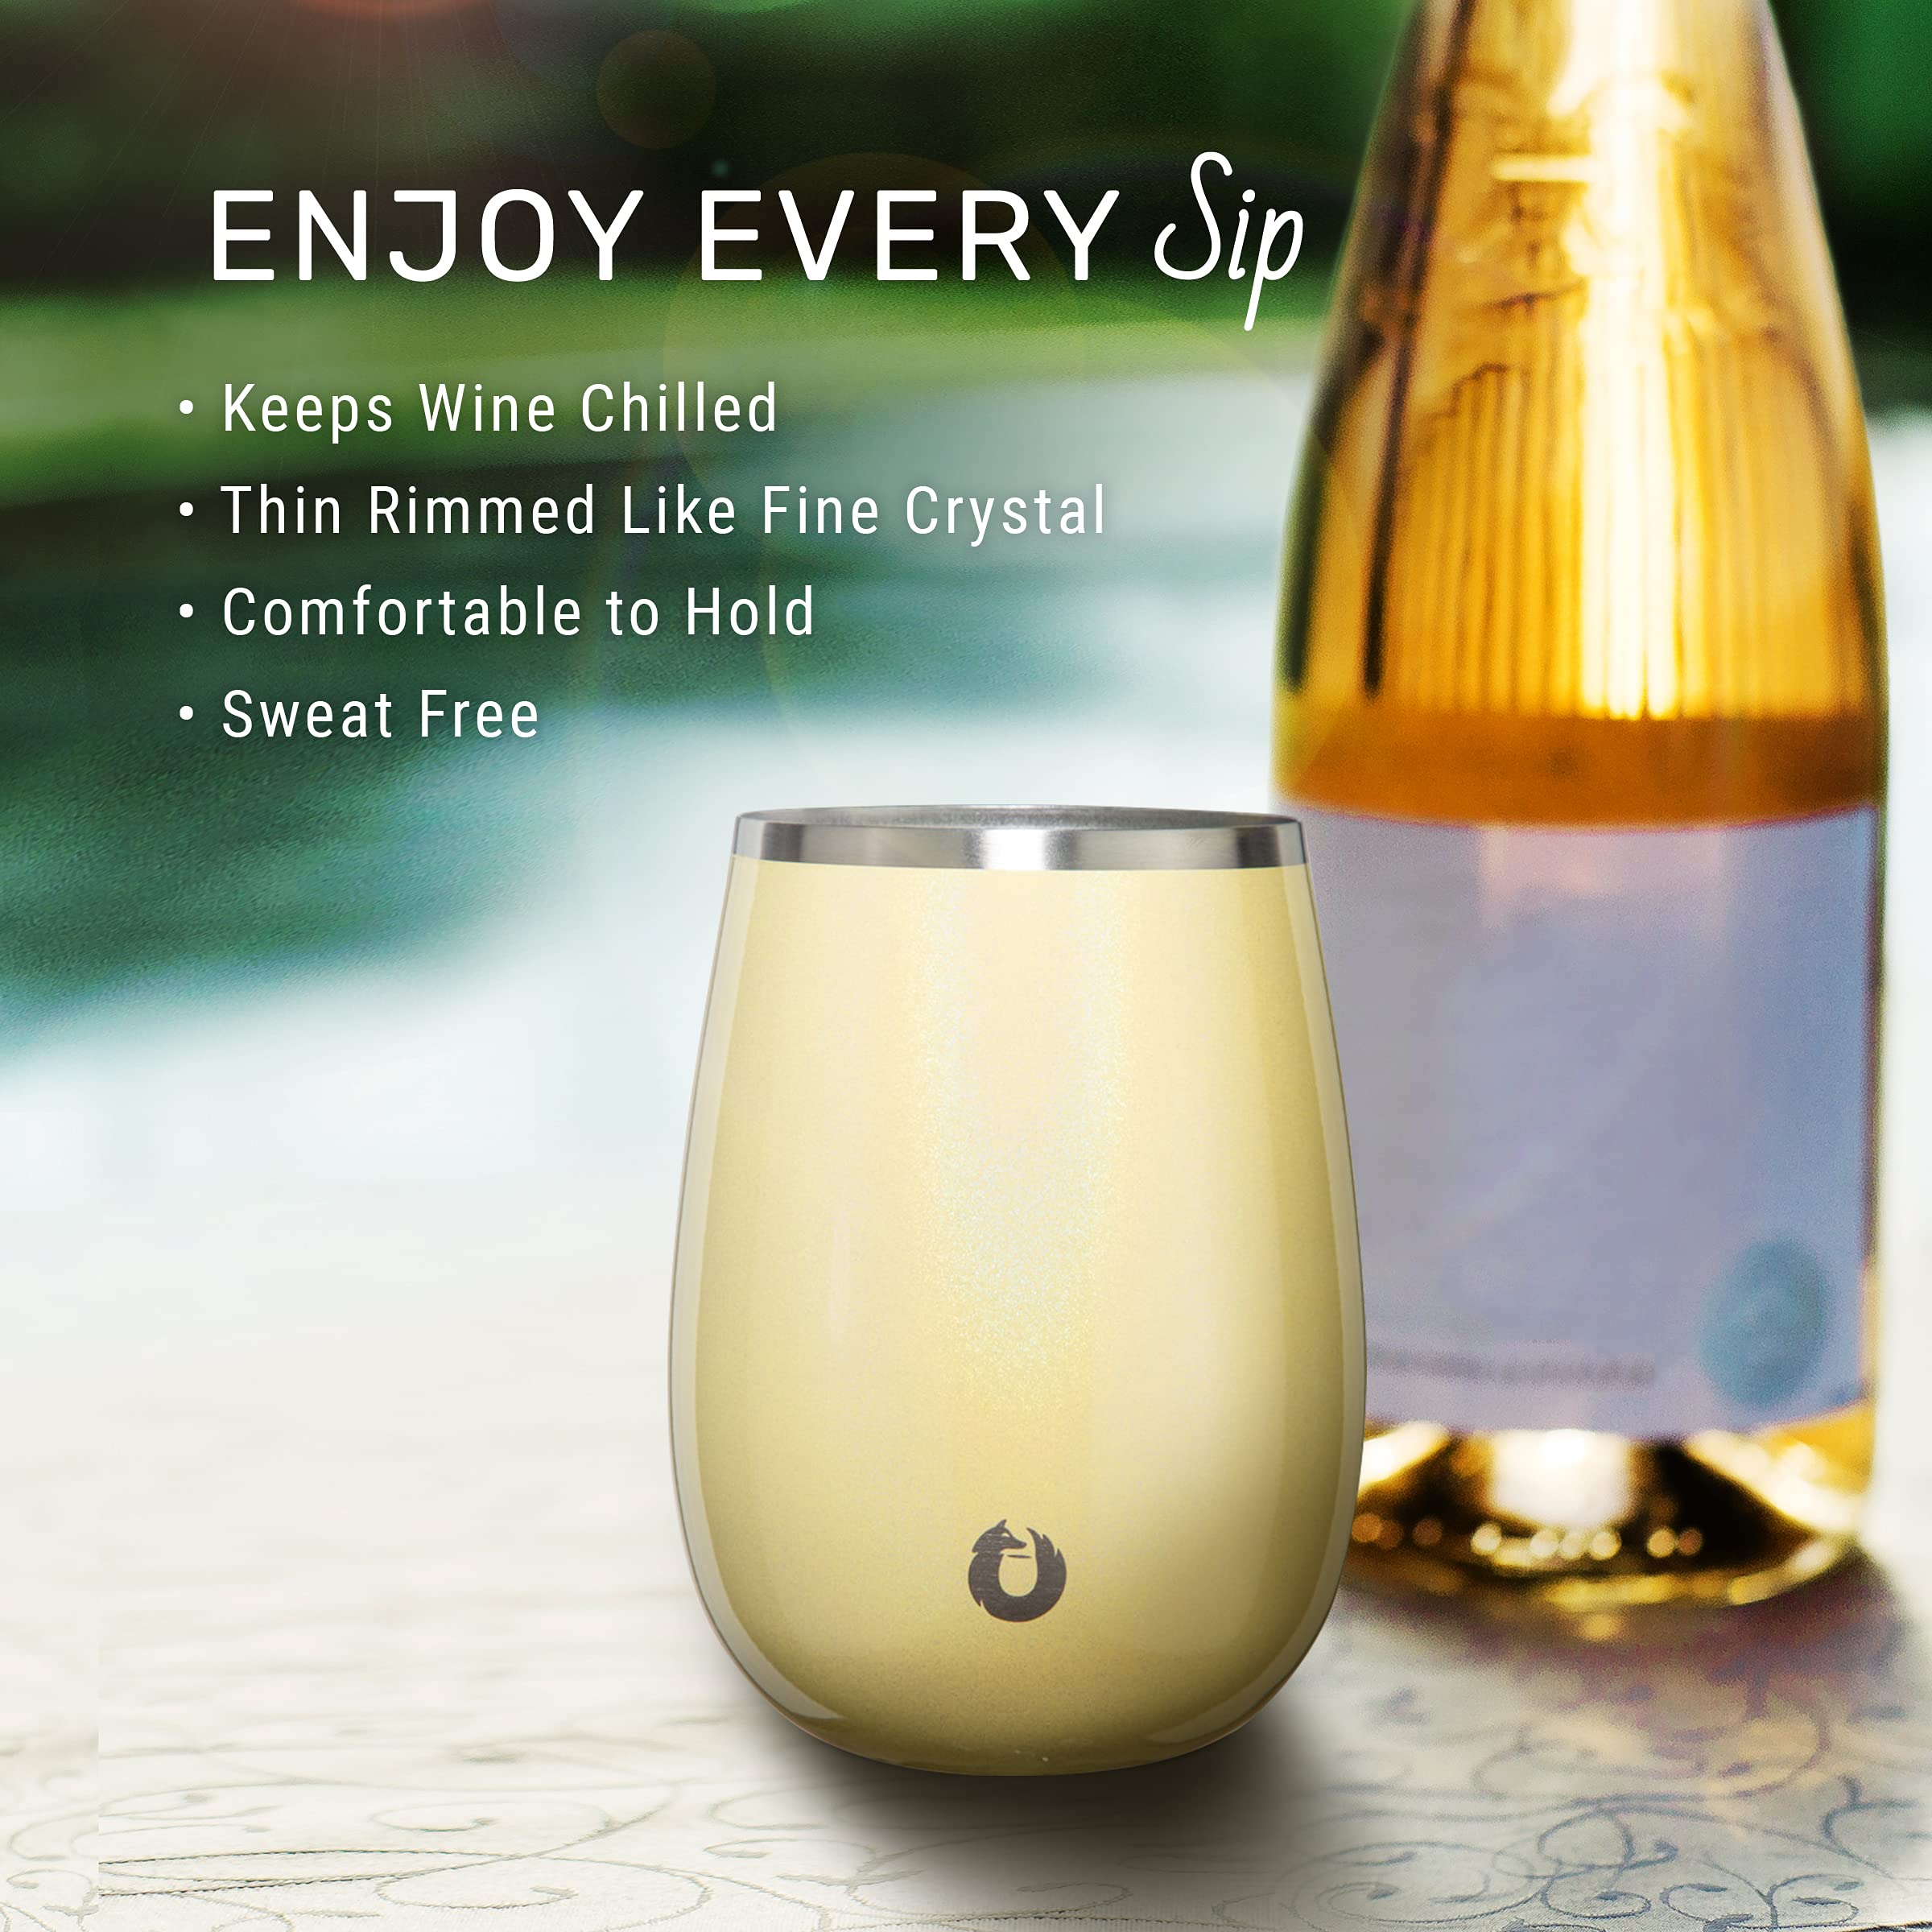 Snowfox Elegance Collection Insulated Stainless Steel Wine and Cocktail Glass, 13.5-ounce Single w/Lid, Orange